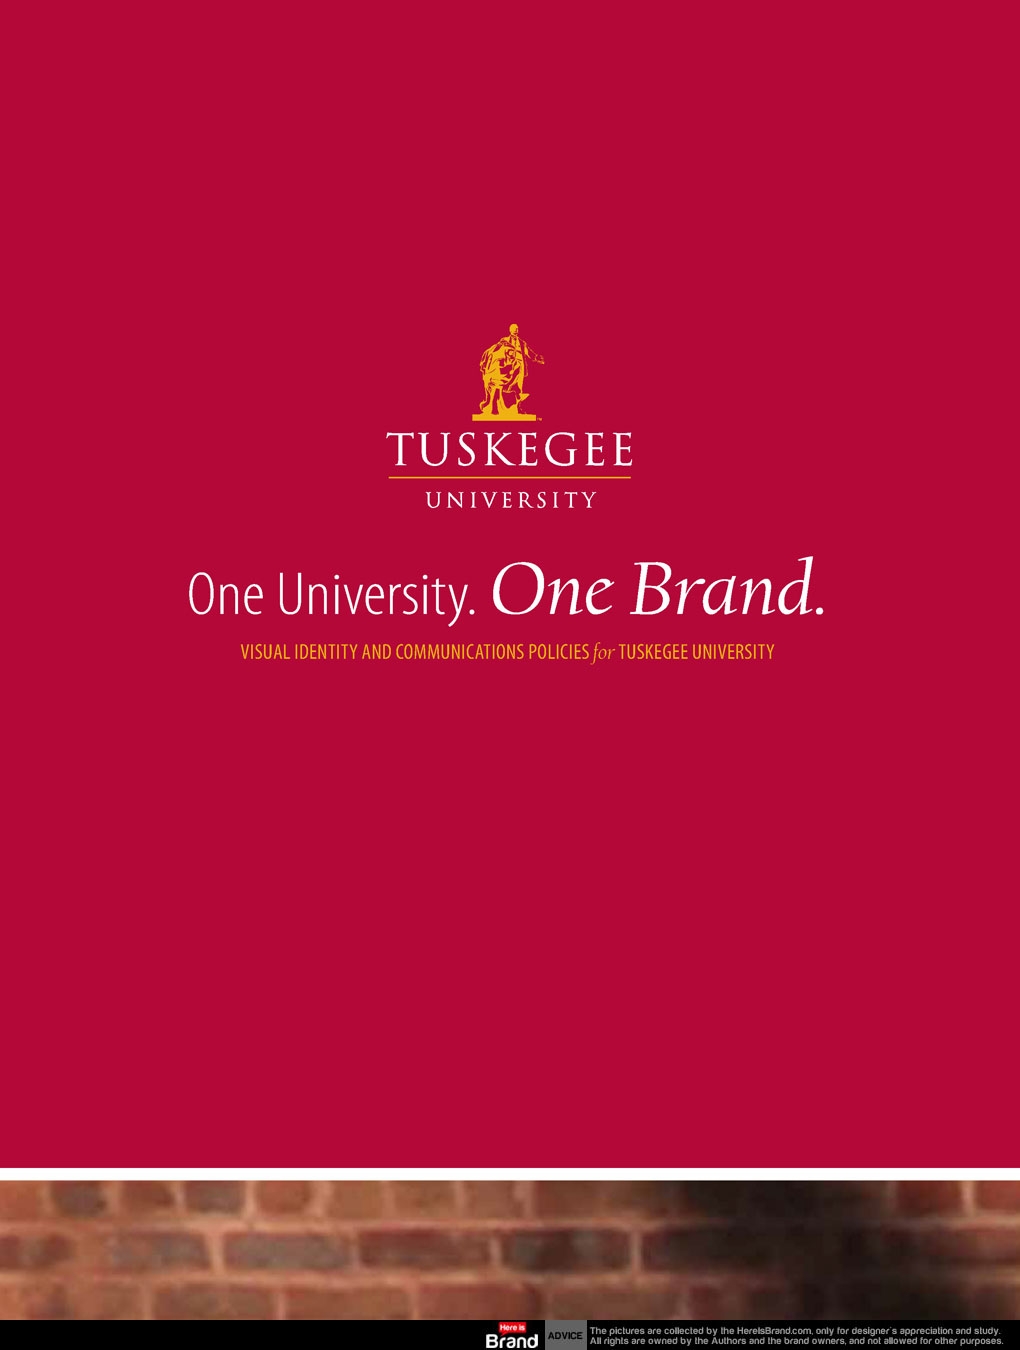 Tuskegee University visual identity and communications policies